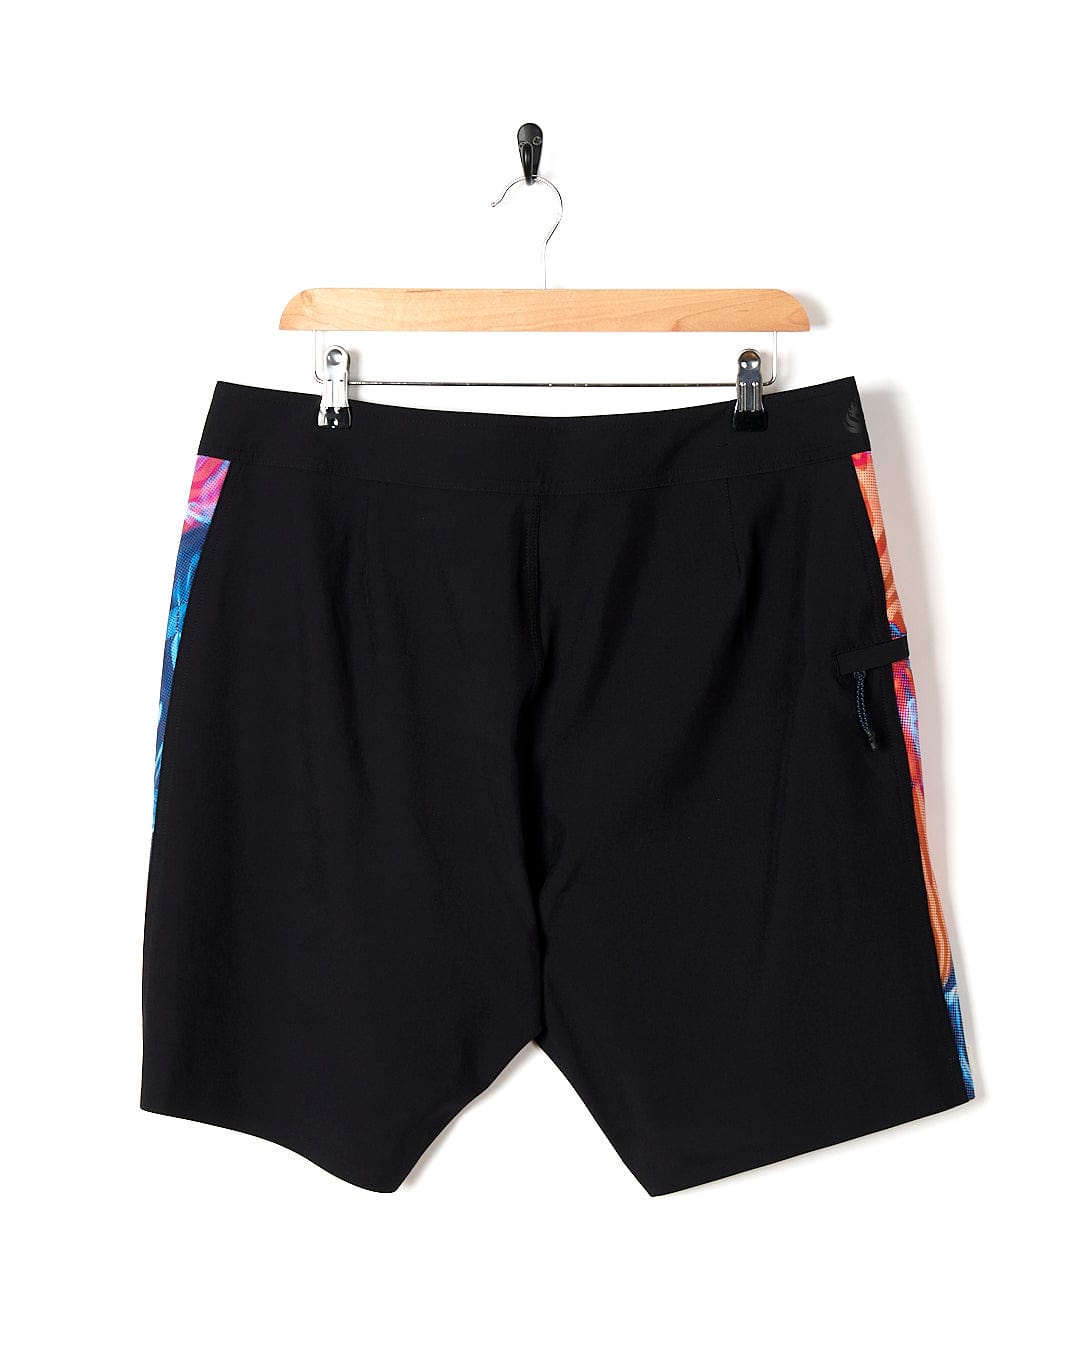 A Saltrock Poolside Panel - Mens Recycled 4-Way Stretch Boardshort - Black with a colorful design on it.